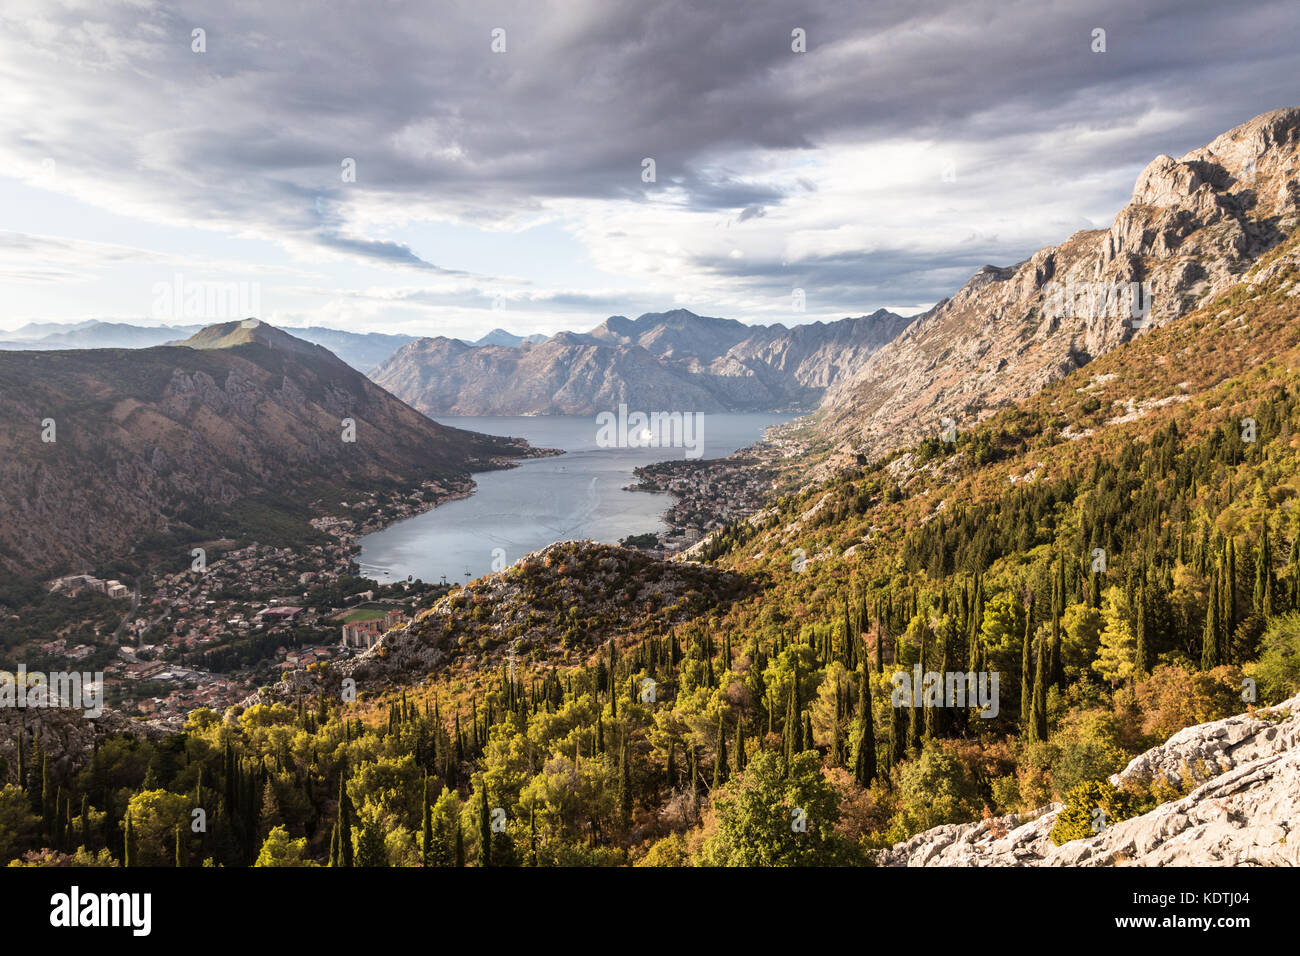 Stunning view of Kotor bay in Montenegro in the Balkans, Southeastern Europe Stock Photo